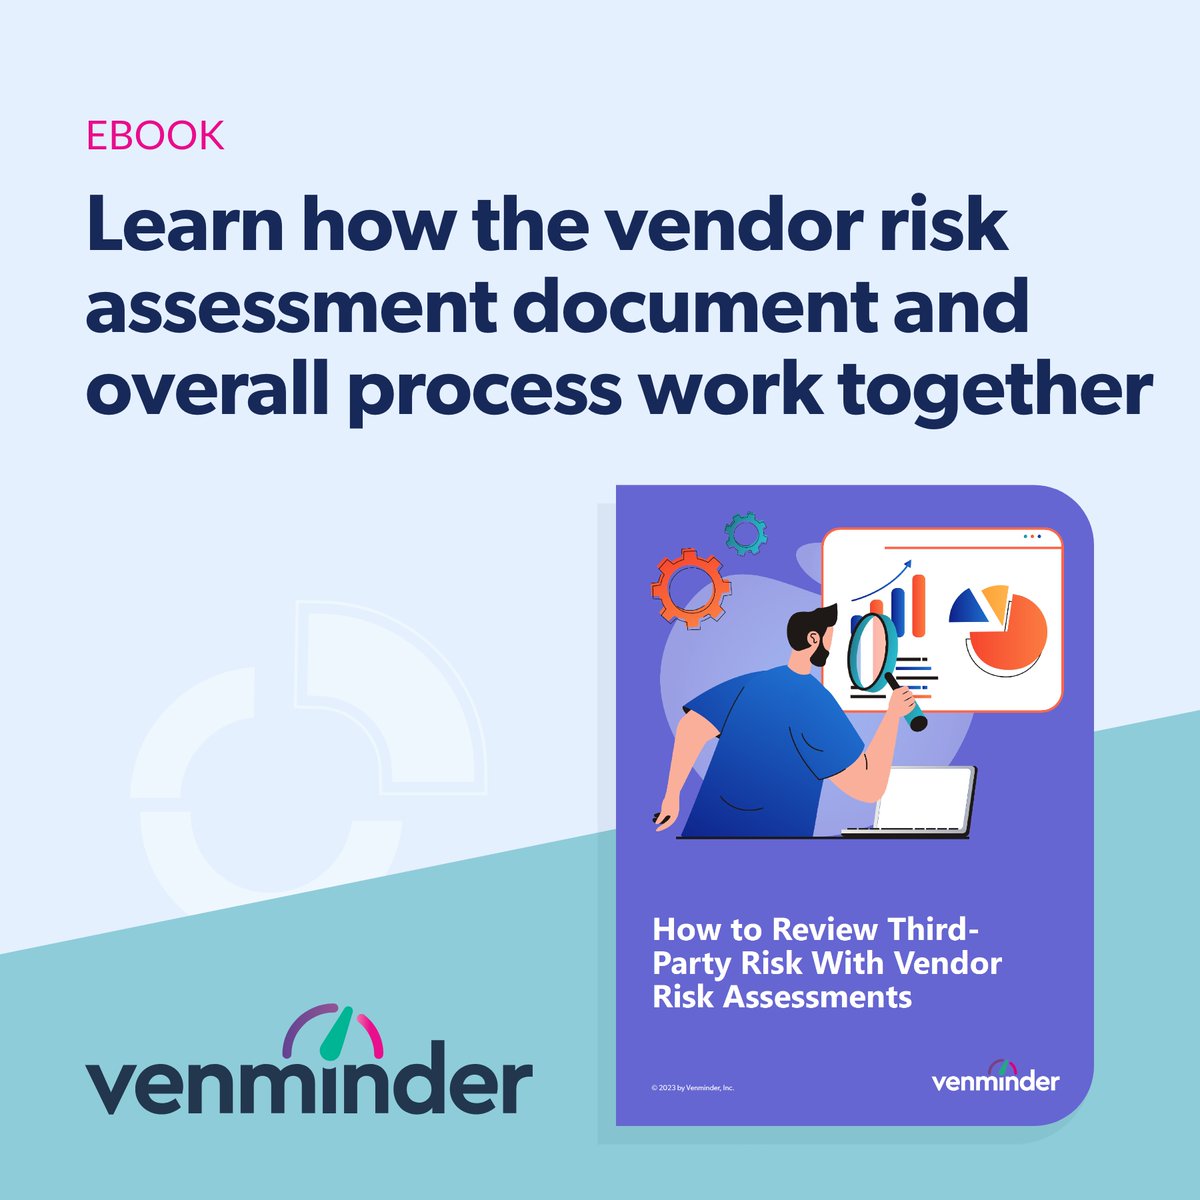 You've probably heard the term 'vendor risk assessment' more times than you can count. And it's even more confusing when you learn there are two main different uses of the term - the process and the document. In this eBook, learn the differences: hubs.ly/Q02v1wK00 #TPRM